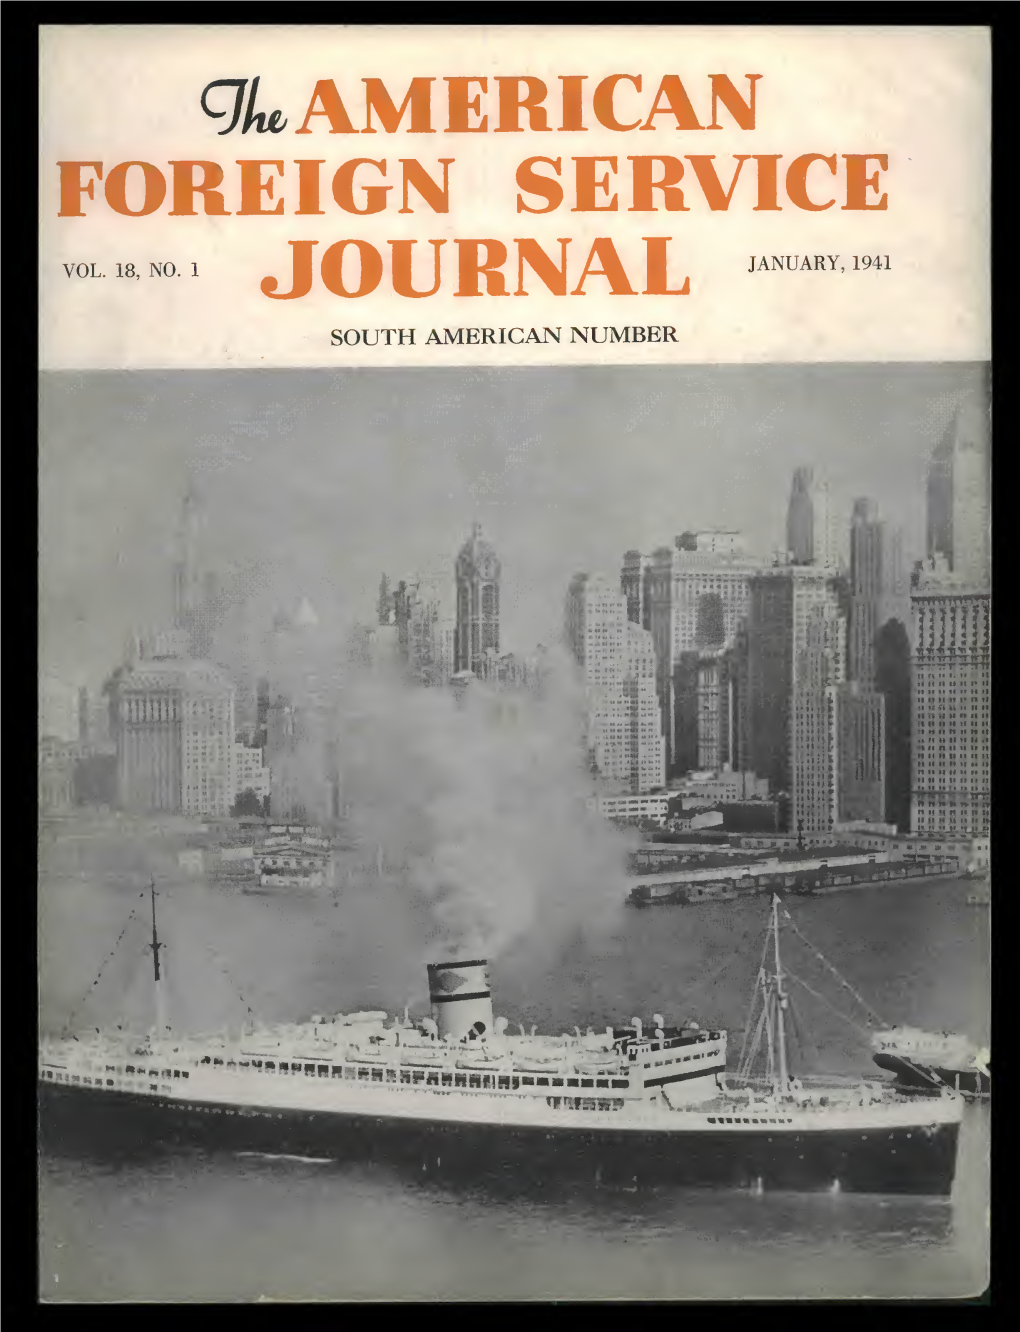 The Foreign Service Journal, January 1941